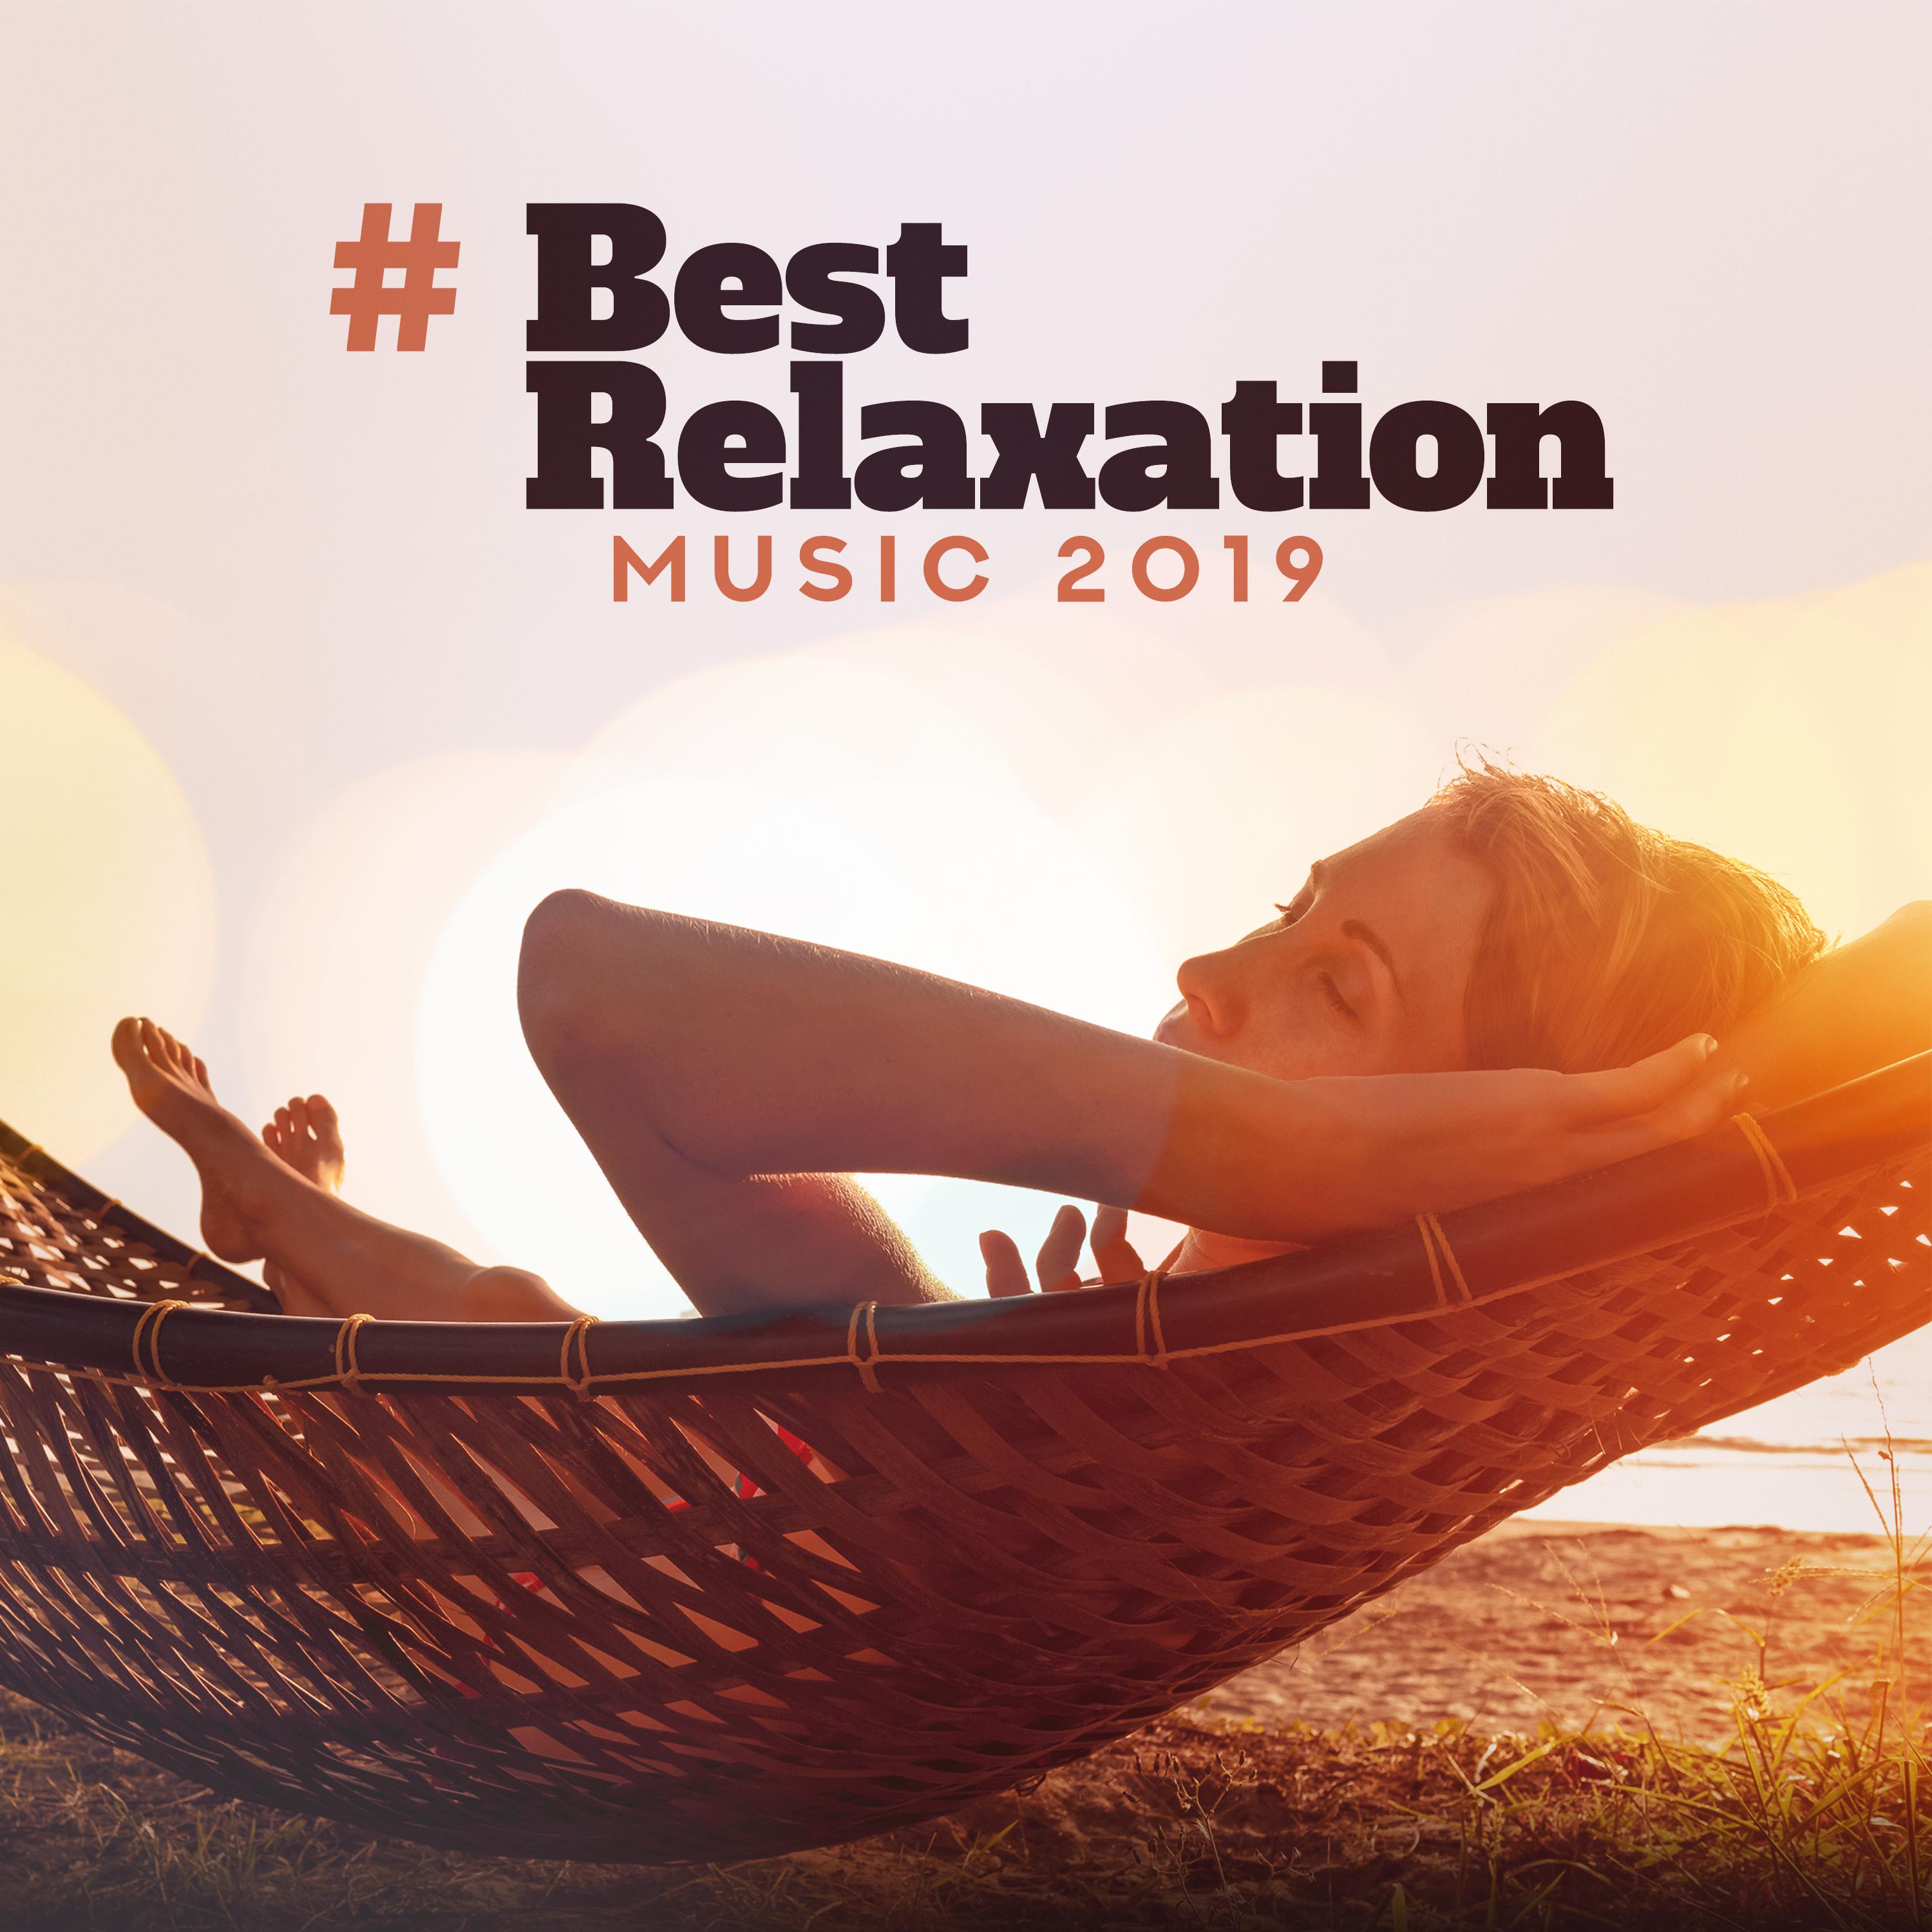 # Best Relaxation Music 2019 (Background Music,Total Relax, Ambient Sounds for Meditation, Deep Sleep, Spa & Massage, Nature Sounds)